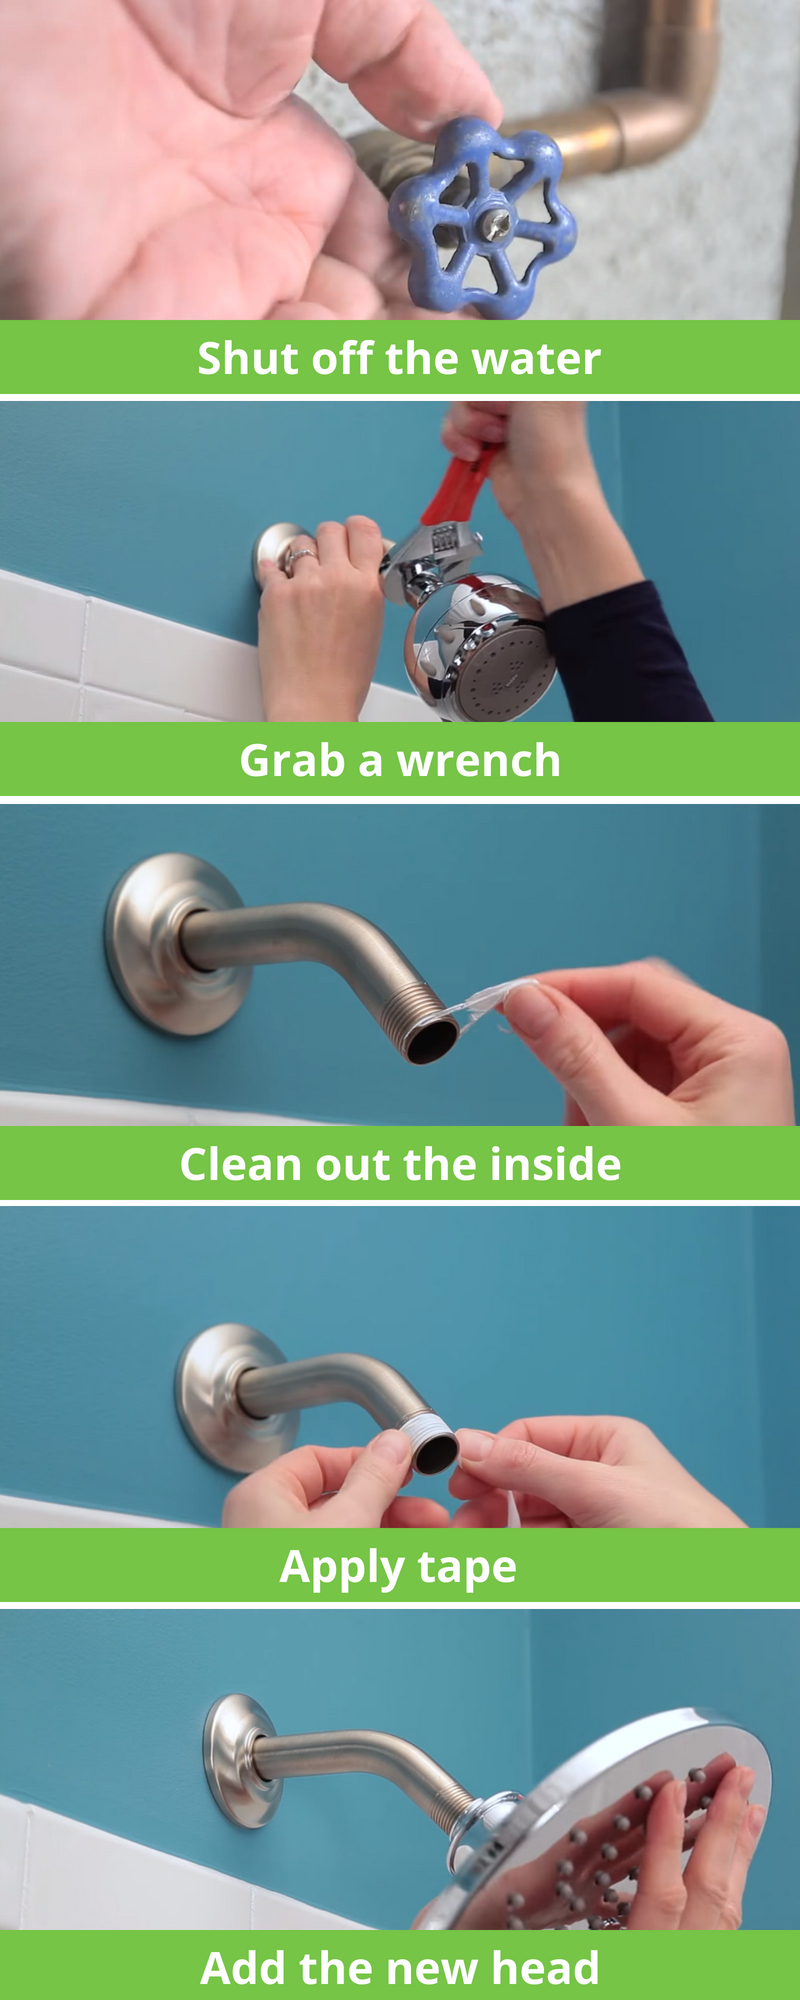 How to Install a New Shower Head - WITH TEXT